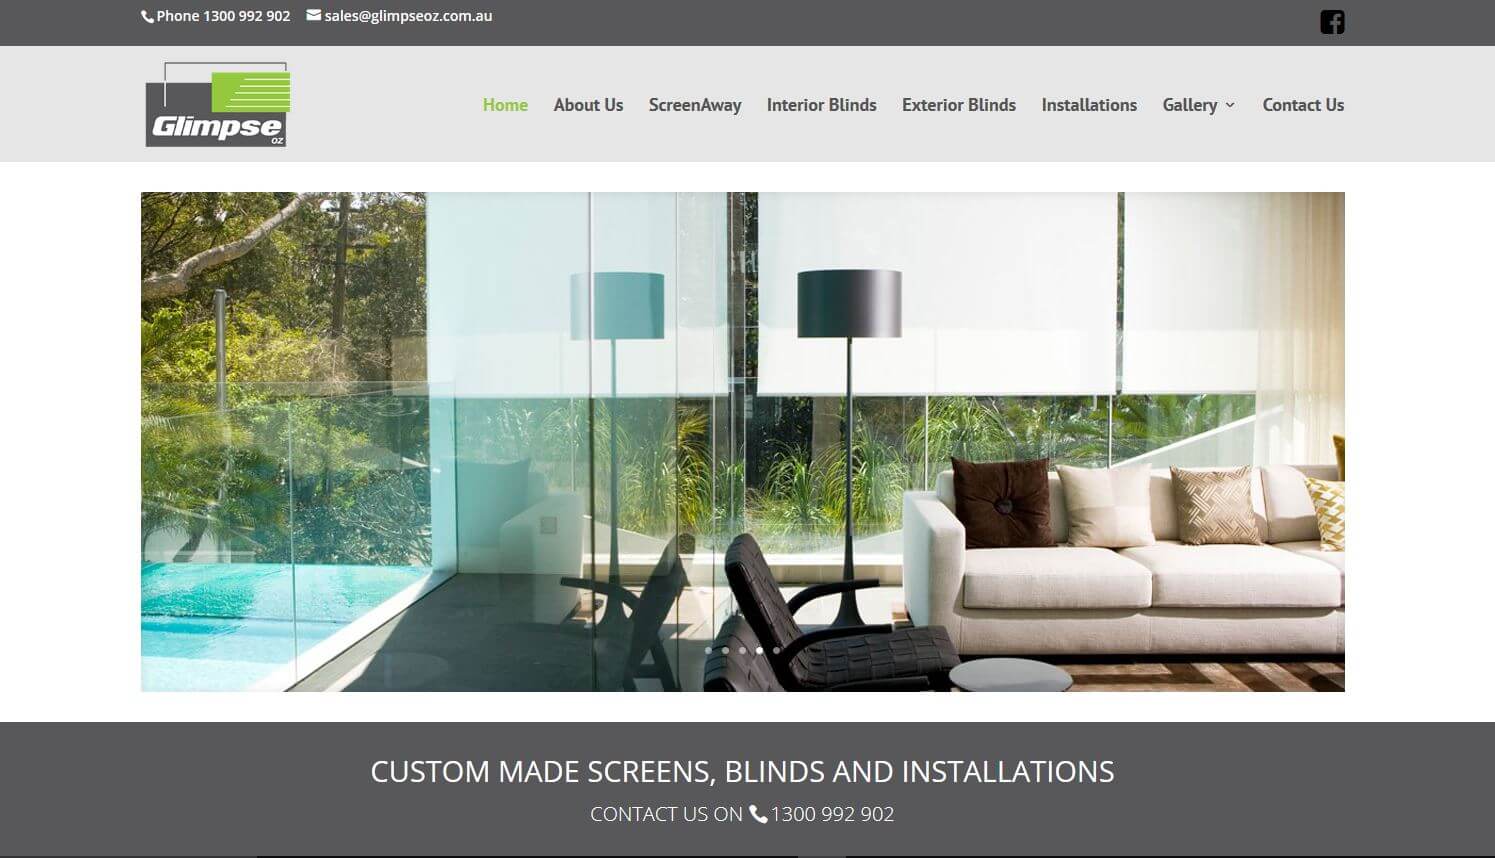 Custom made screens, blinds and installations